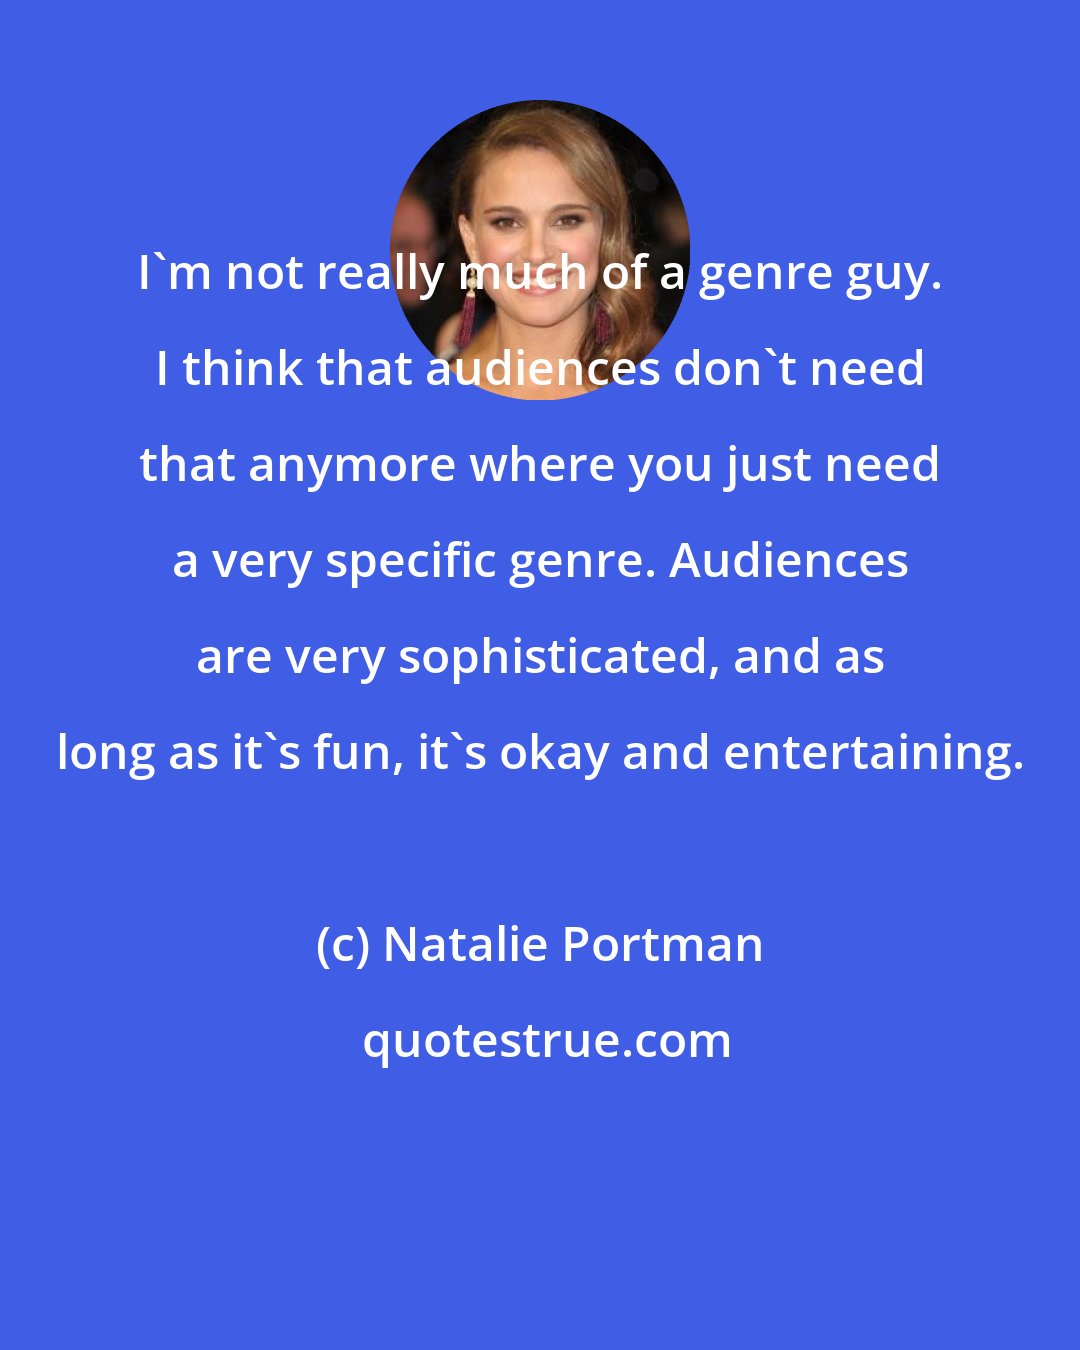 Natalie Portman: I'm not really much of a genre guy. I think that audiences don't need that anymore where you just need a very specific genre. Audiences are very sophisticated, and as long as it's fun, it's okay and entertaining.